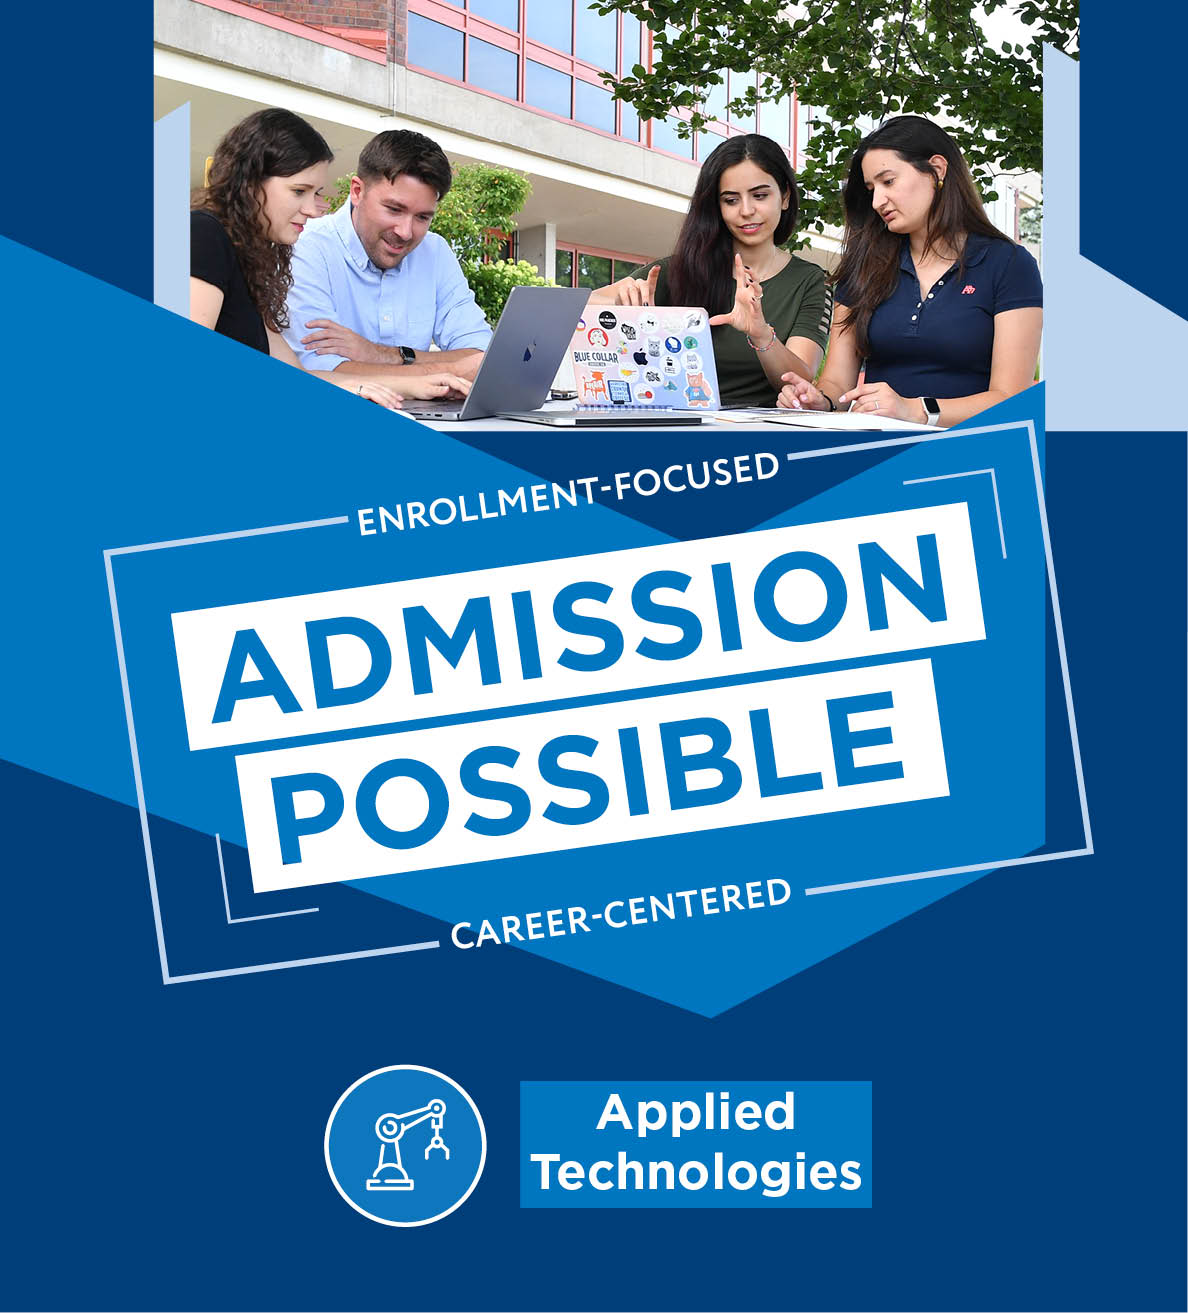 Admission Possible: Applied Technologies